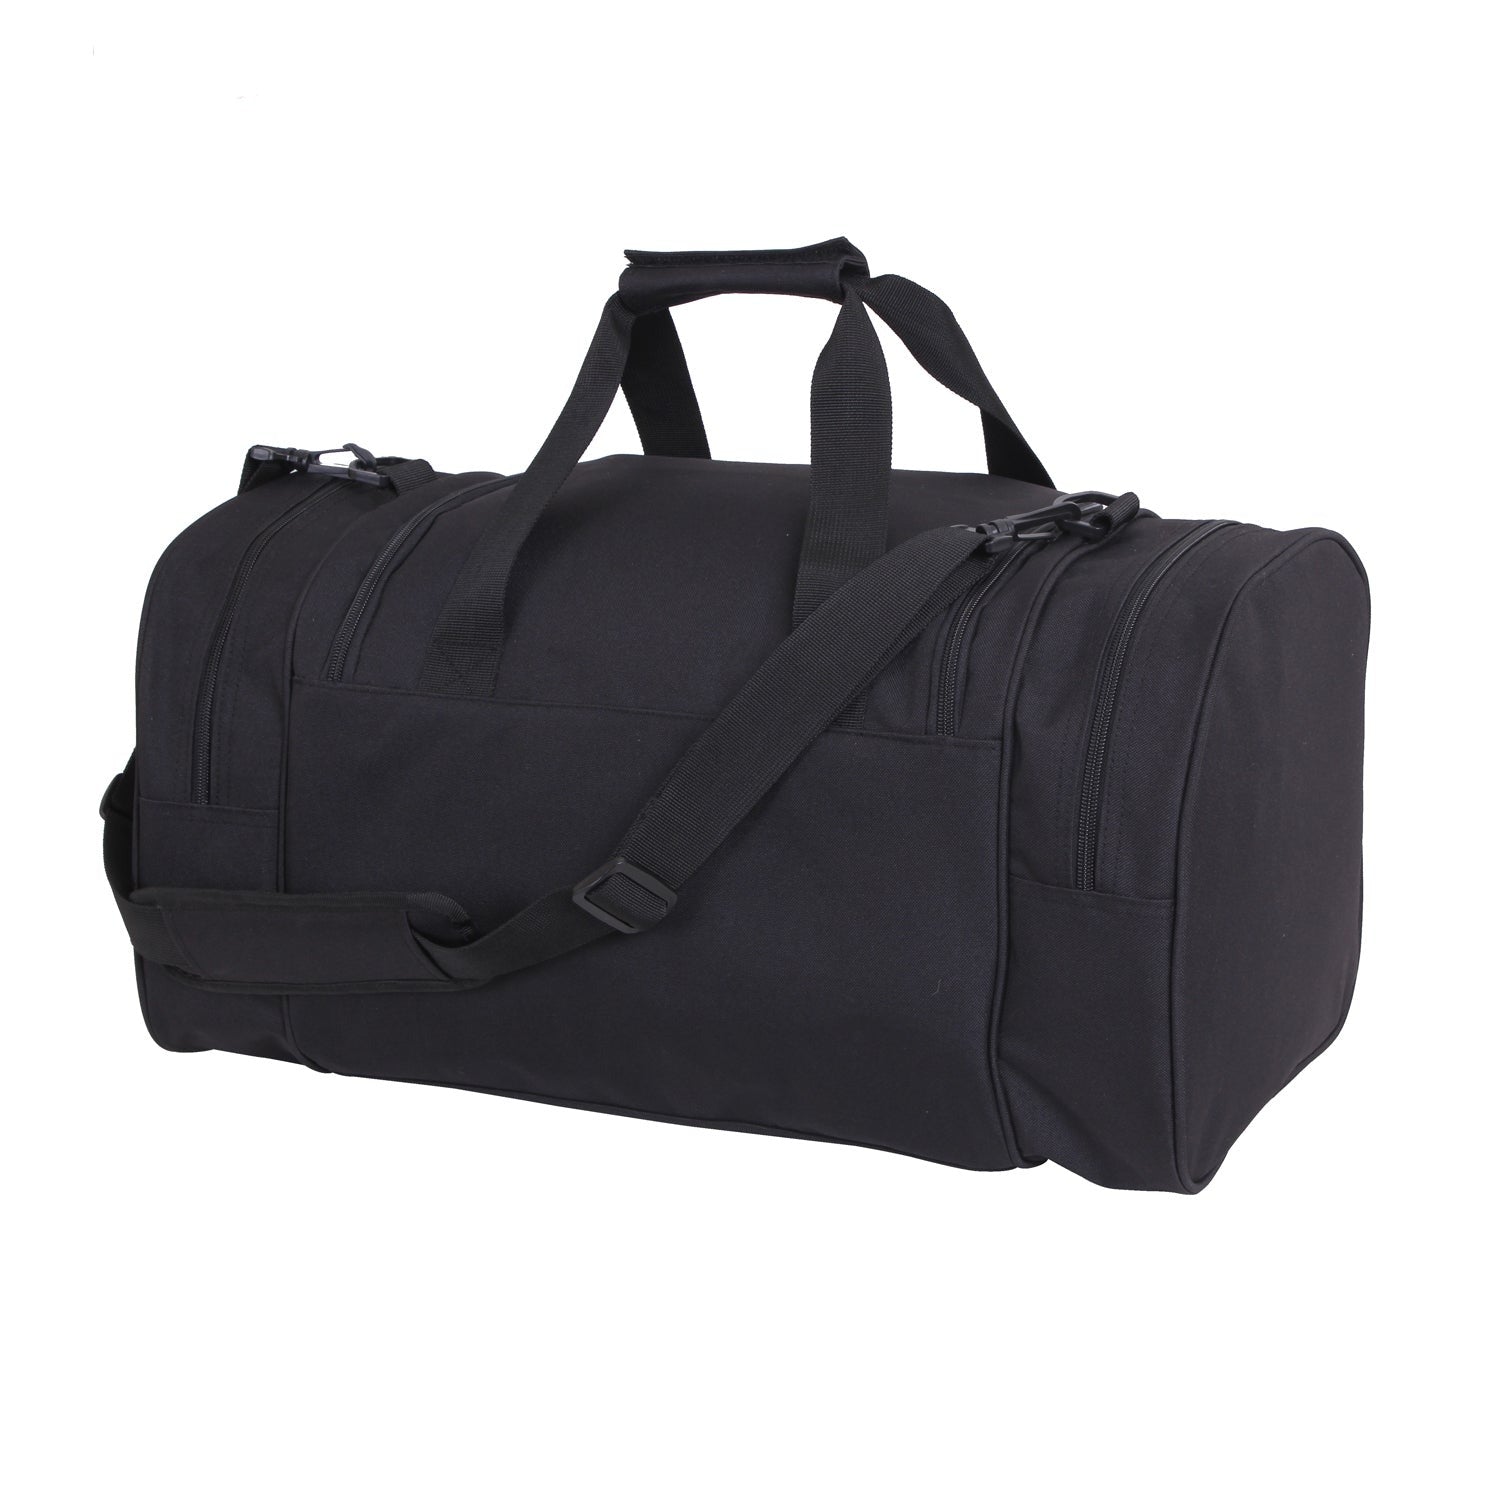 Sport Duffle Carry On Bag - Tactical Choice Plus